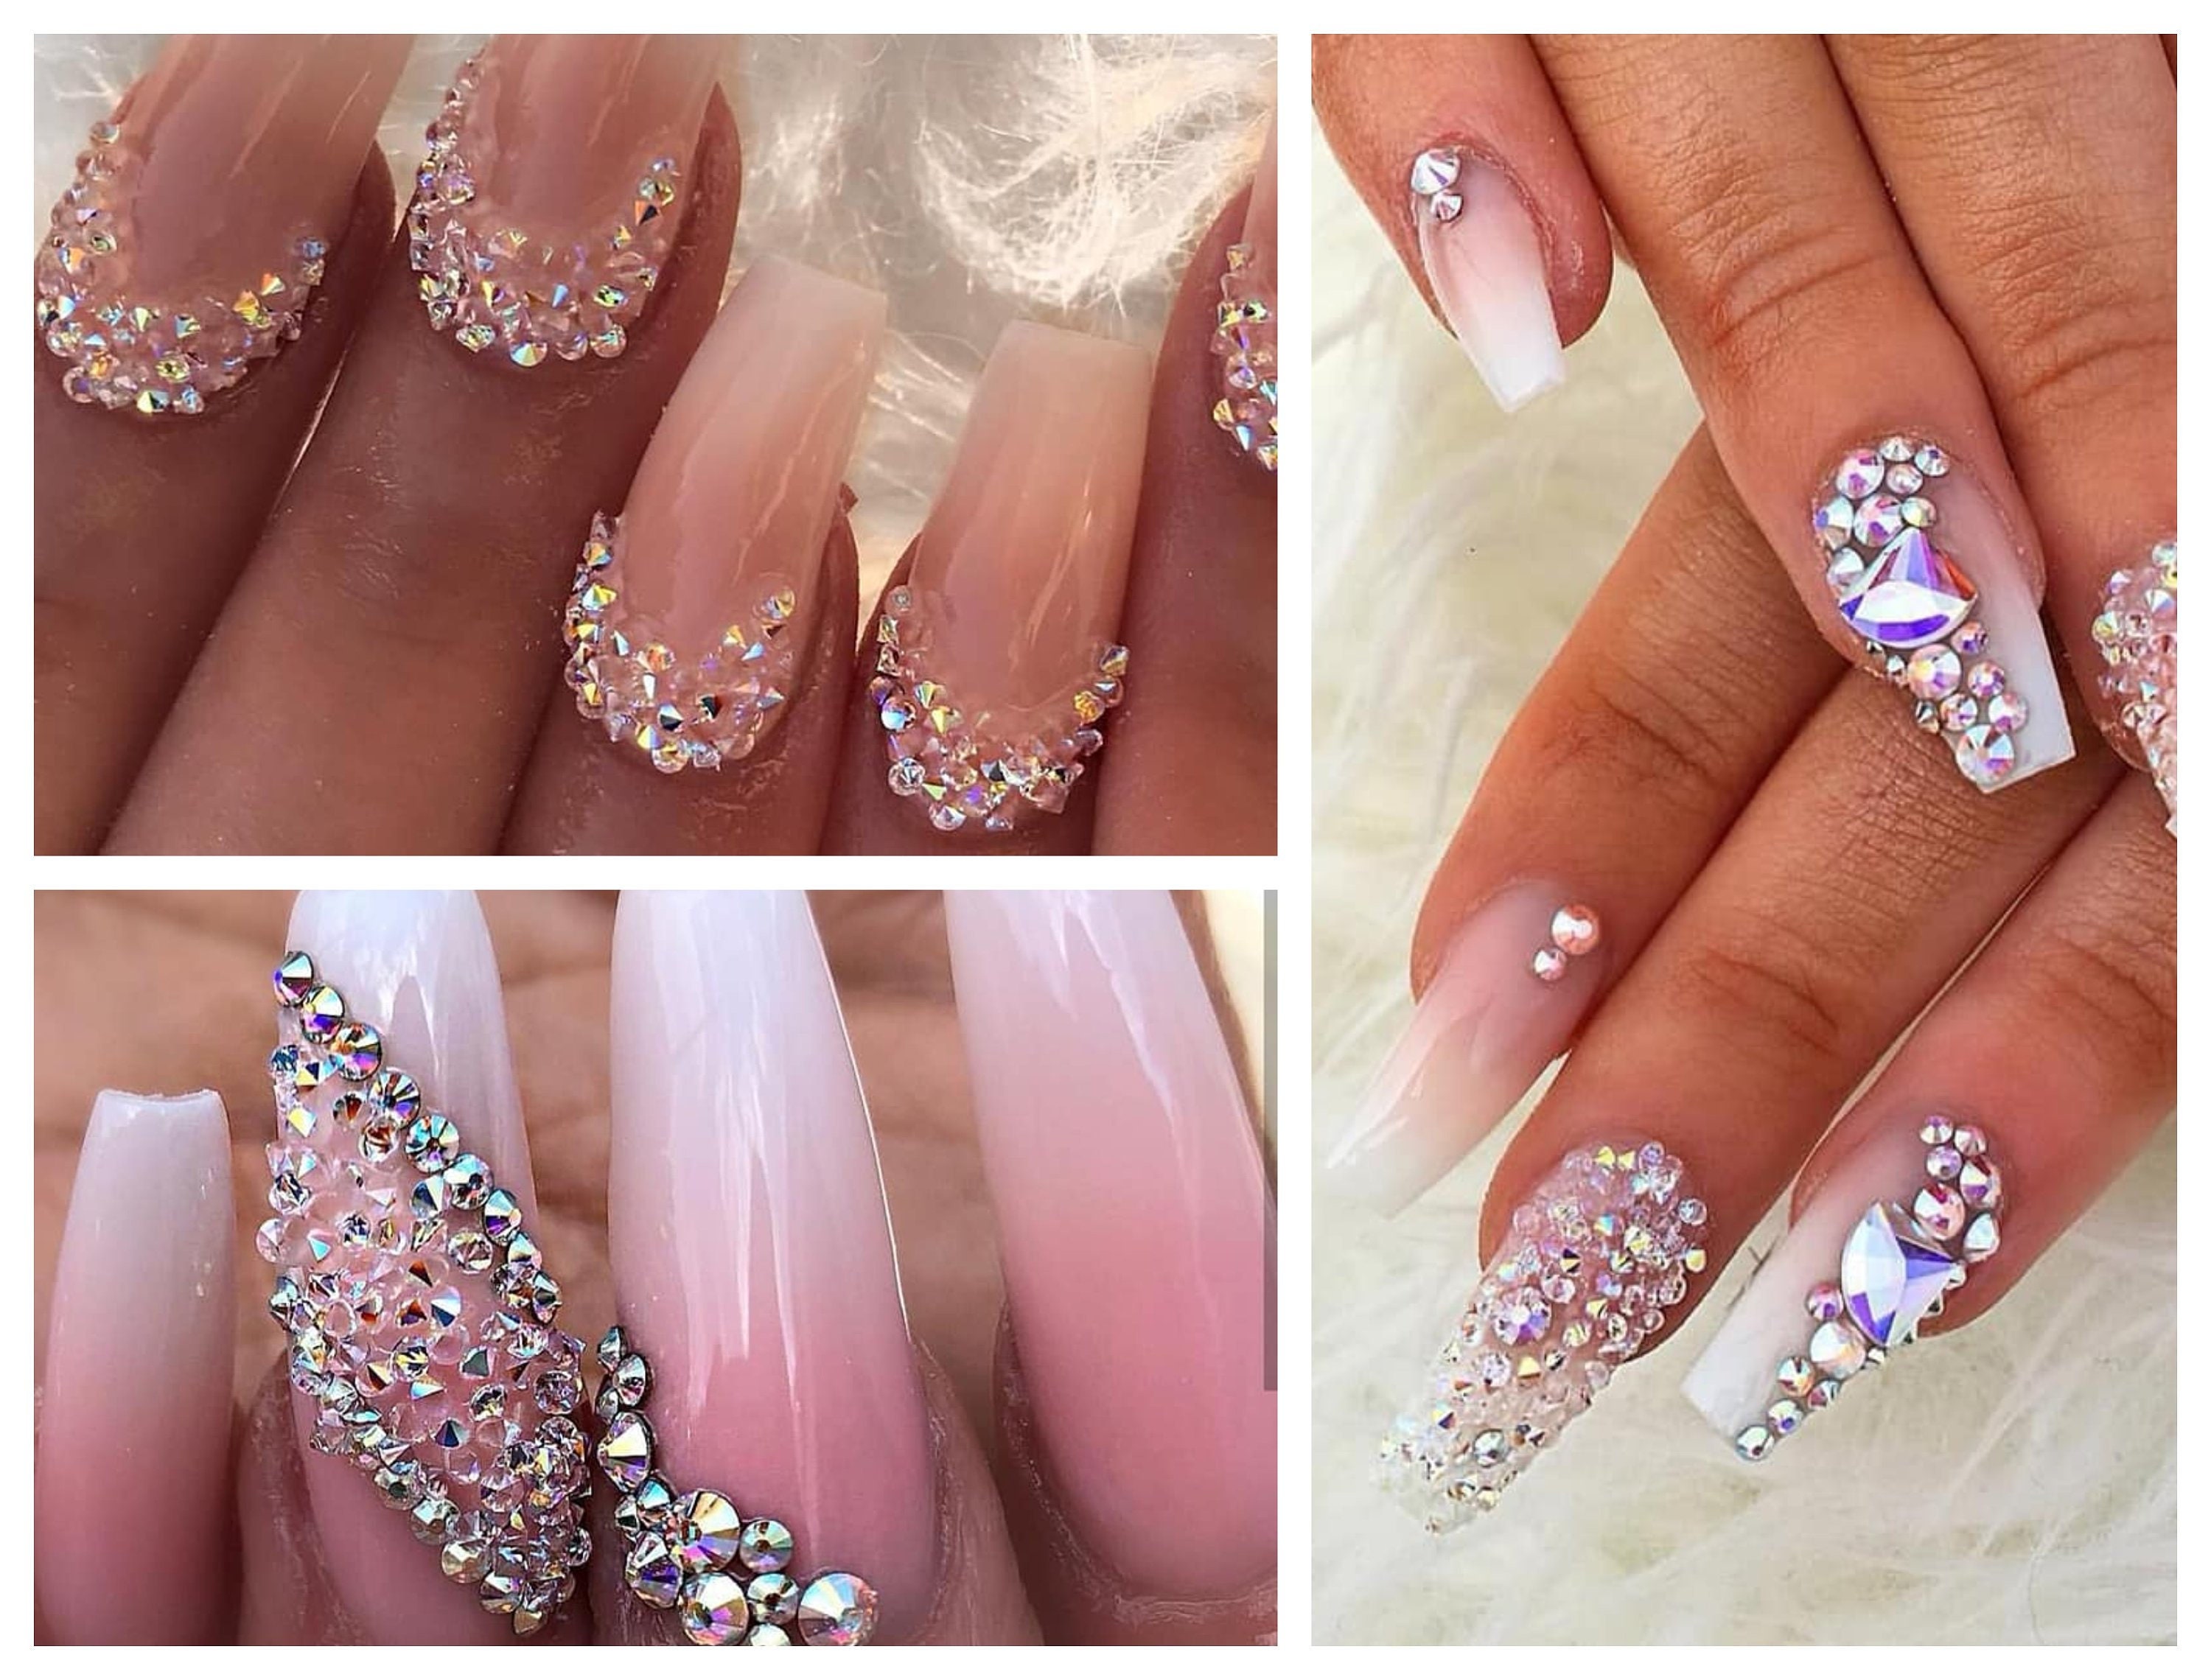 Nail Art with Crystal Pixie Dust - wide 2